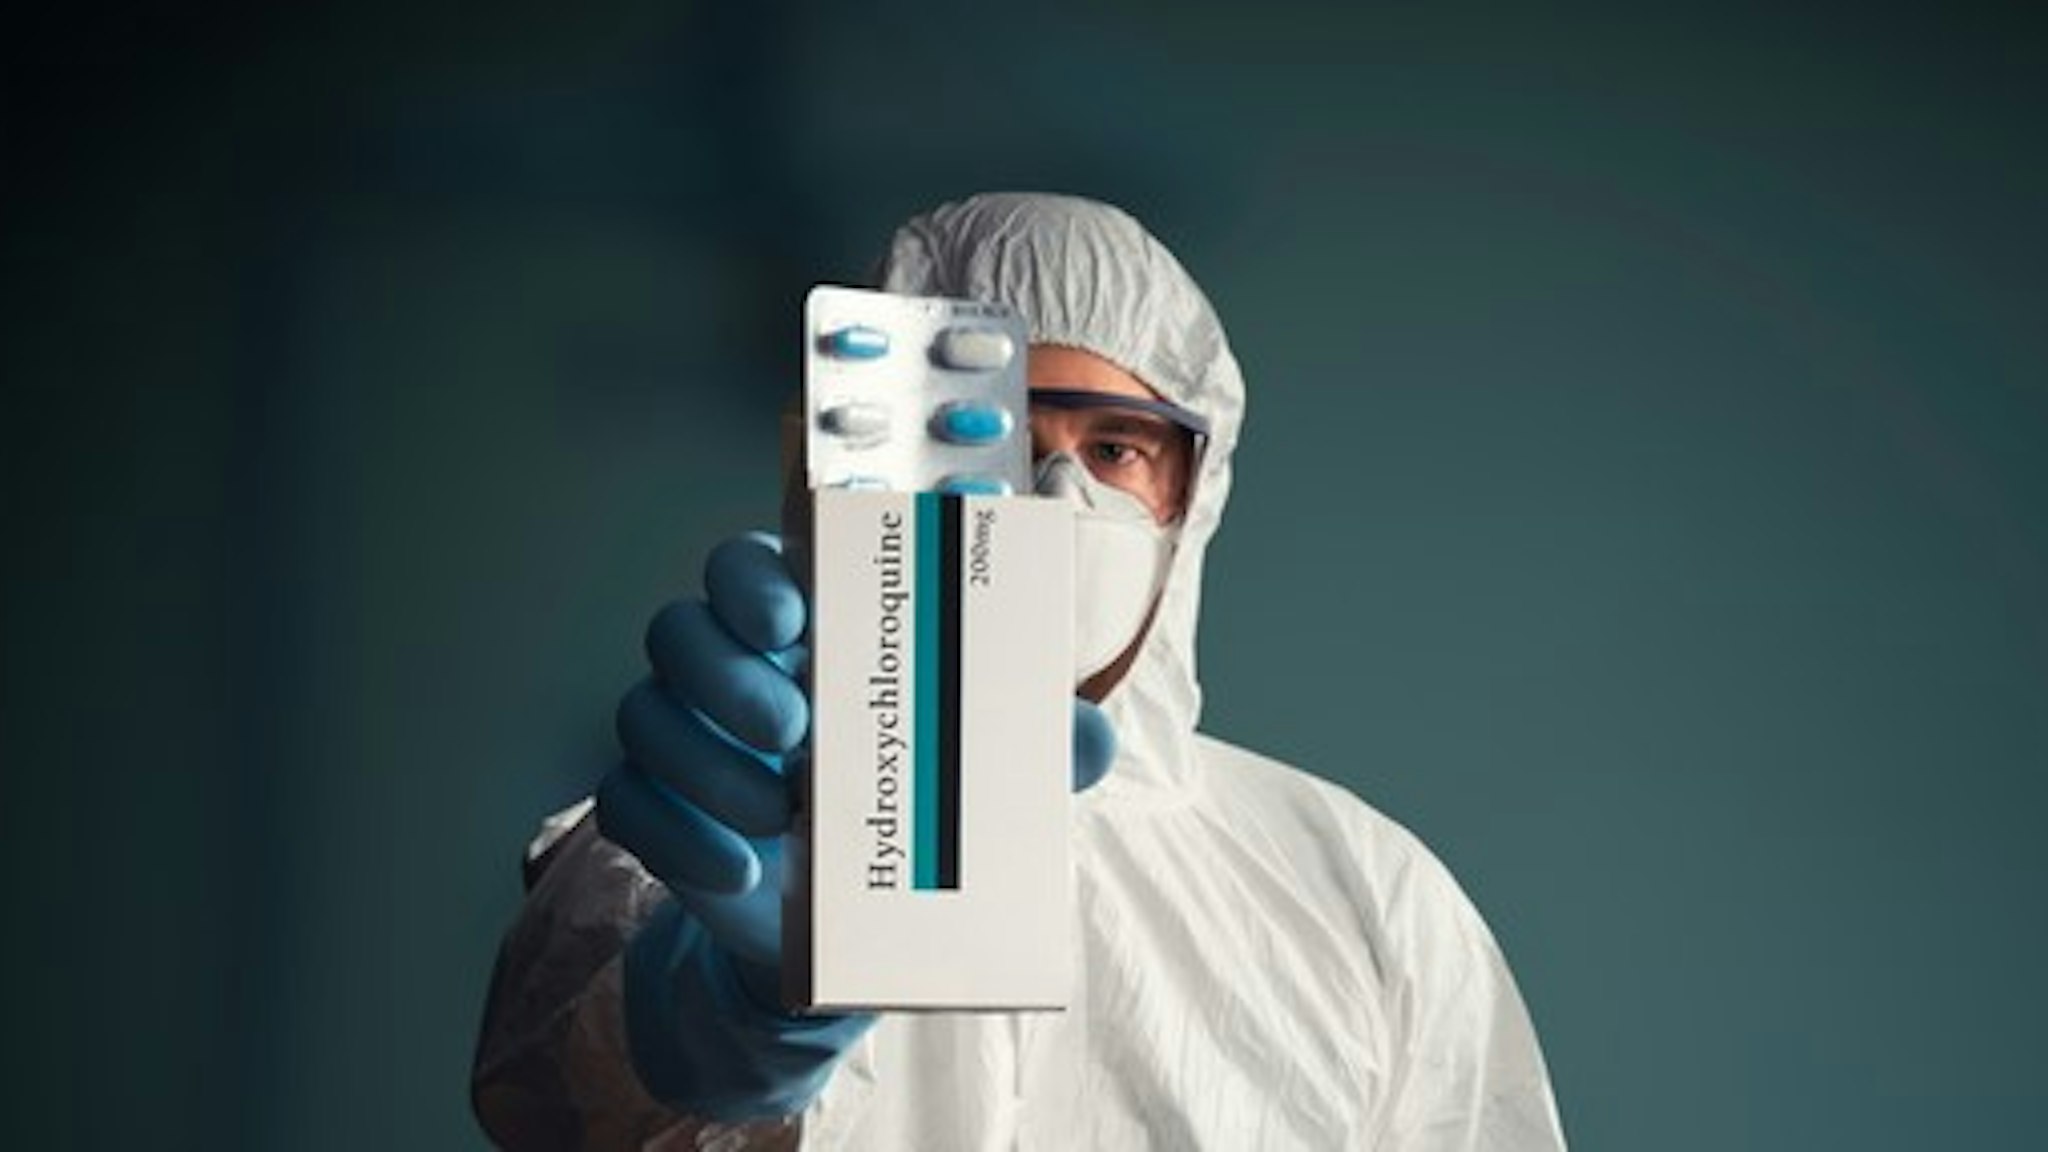 Medical worker in full protective suit holding hydroxychloroquine drug tablets